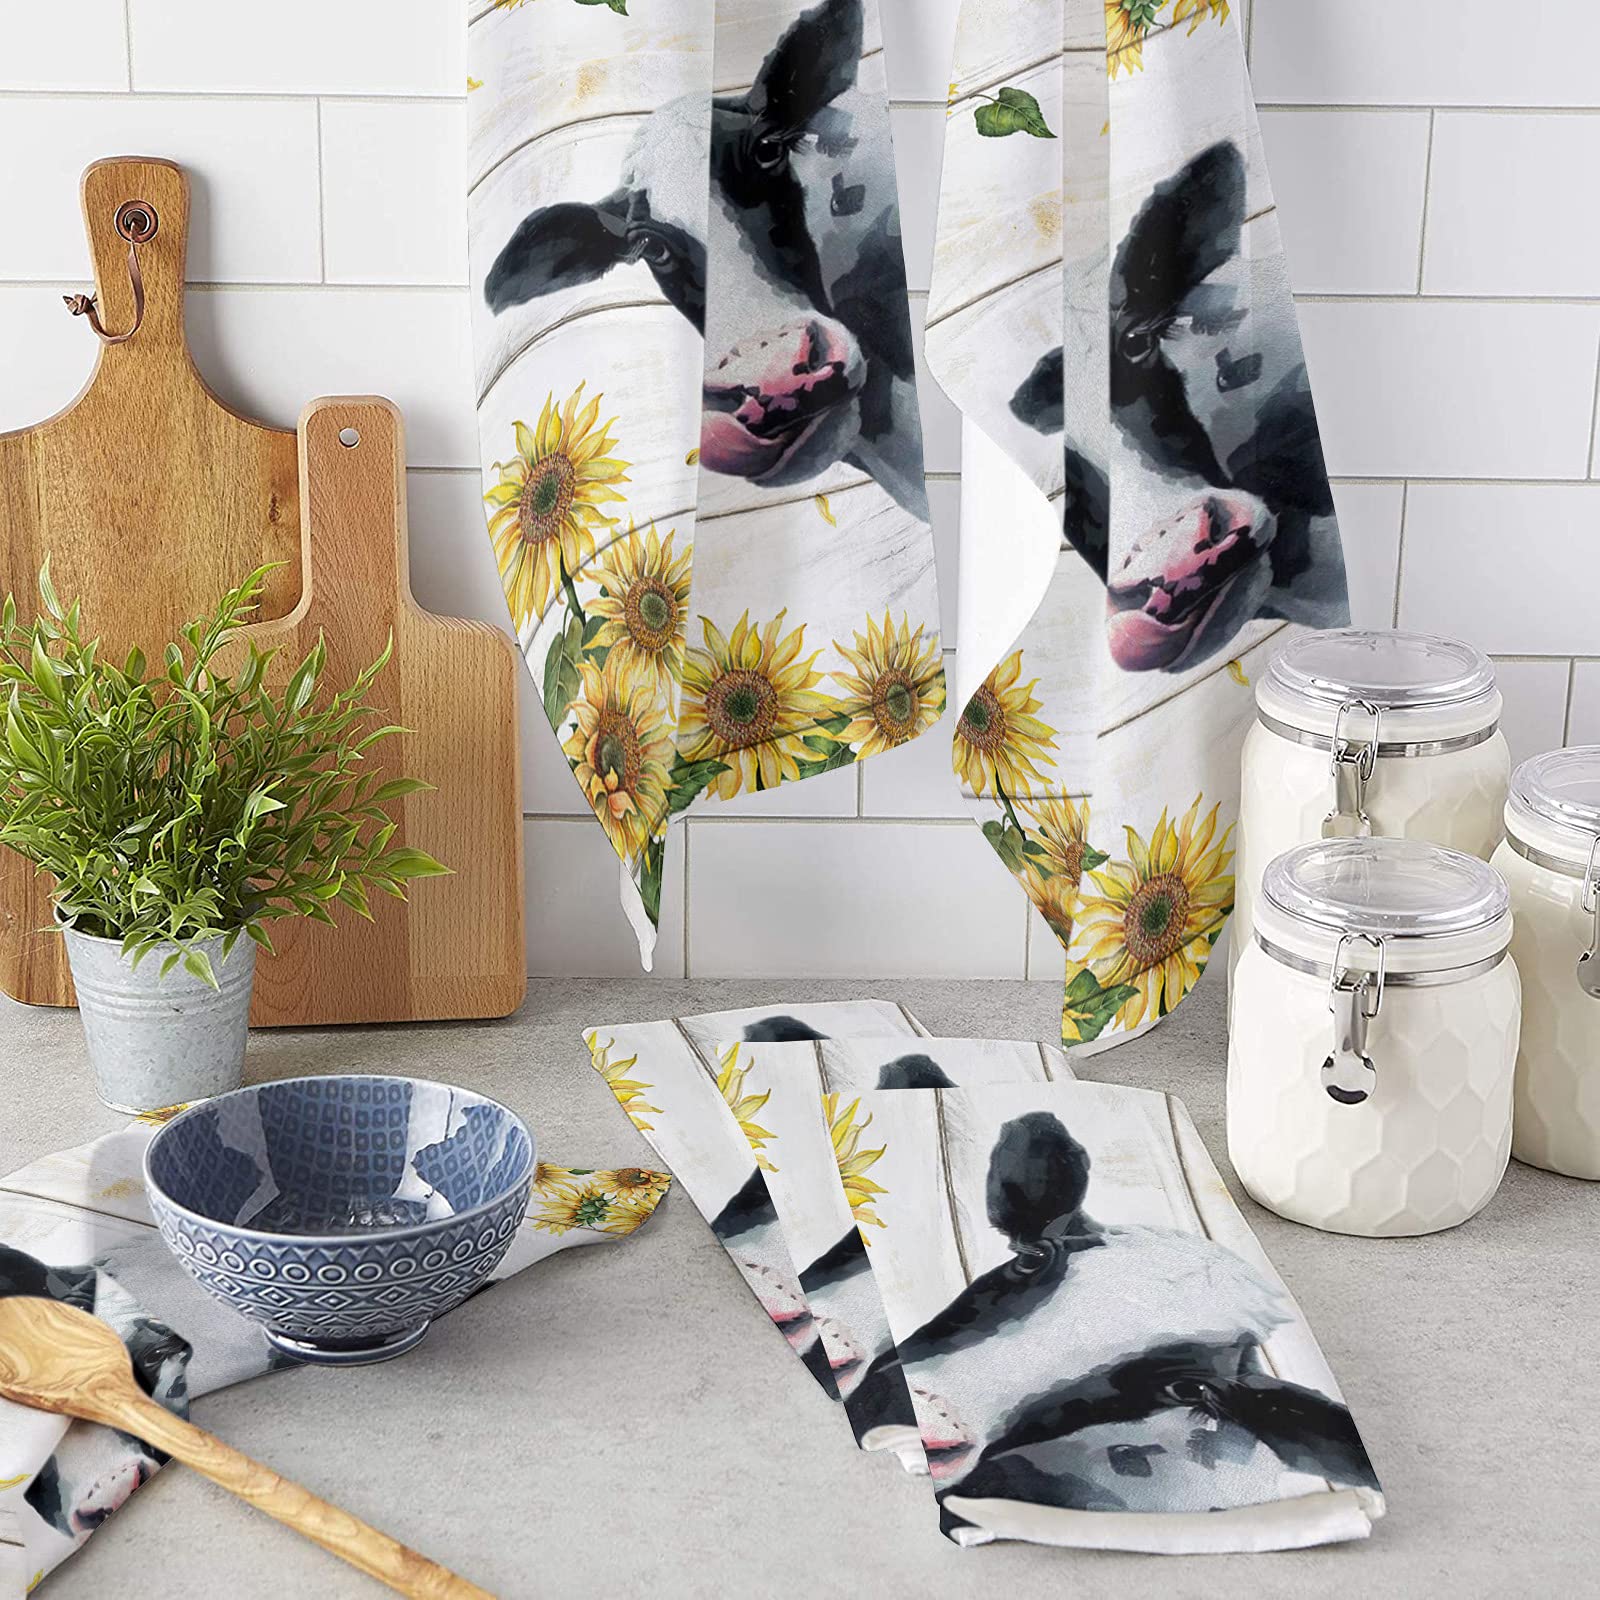 Chucoco Dish Towels for Kitchen, Hand Towel Cleaning Cloths Yellow Sunflowers with Black White Cow Absorbent Fast Drying Dish Rags, Cattle Animals Wood Board Bathroom Cloth Set of 4 with Hanging Loop